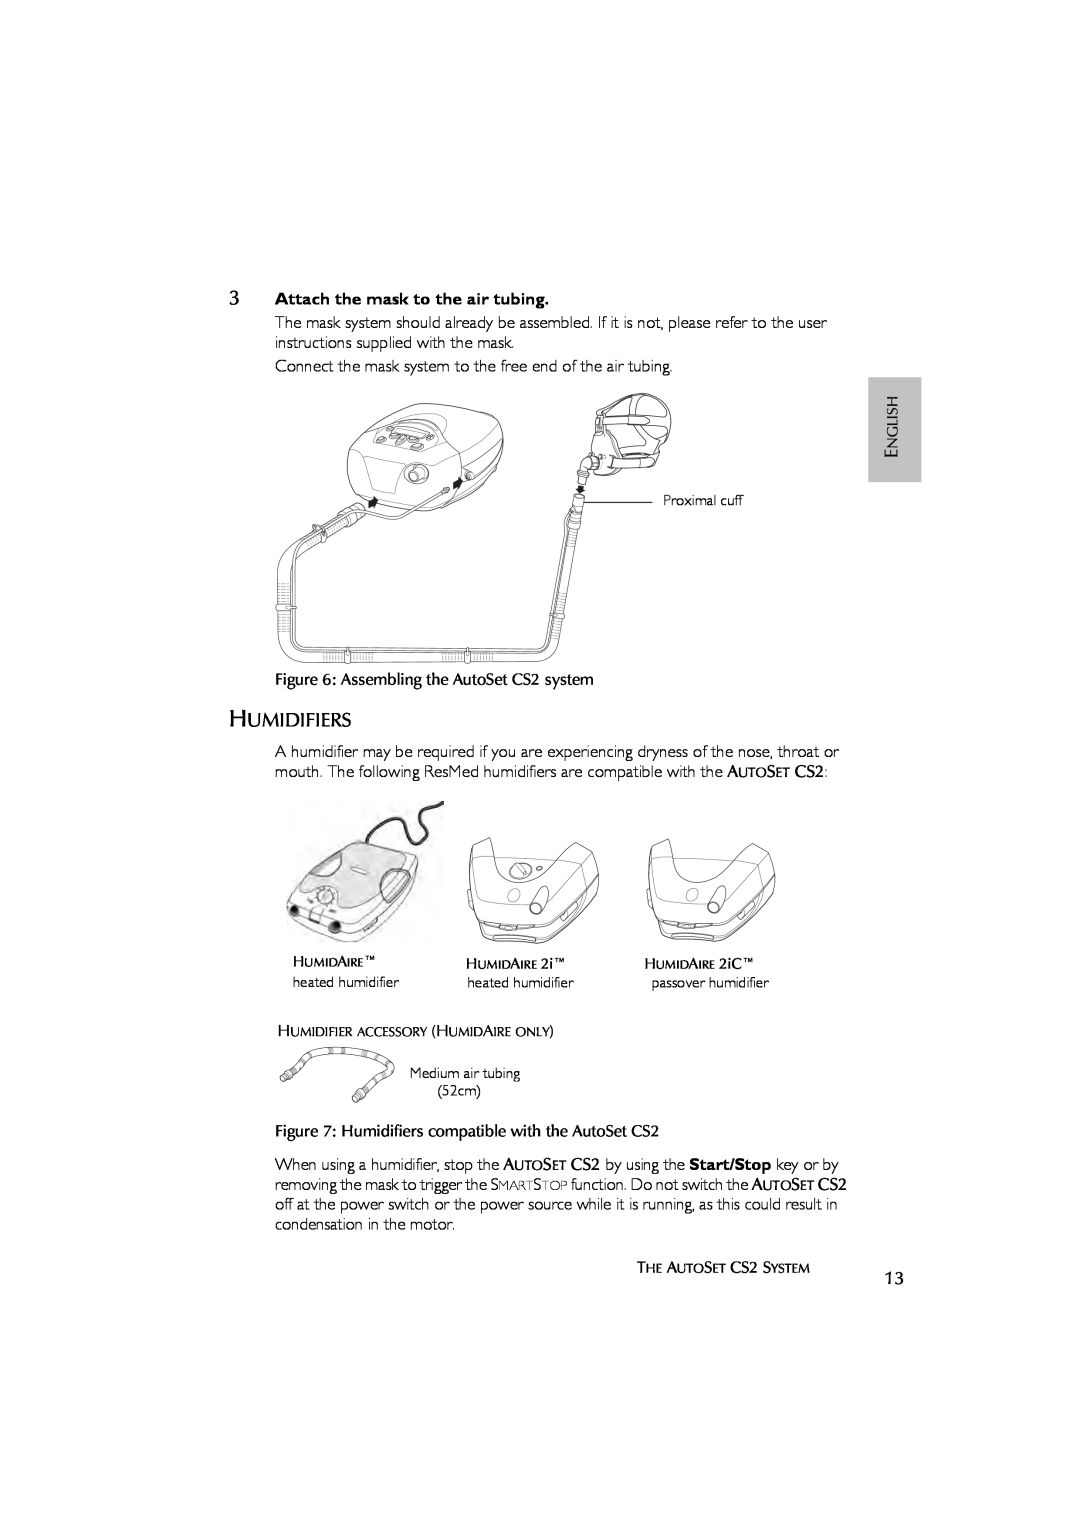 ResMed AutoSet CS 2 user manual Humidifiers, Attach the mask to the air tubing 